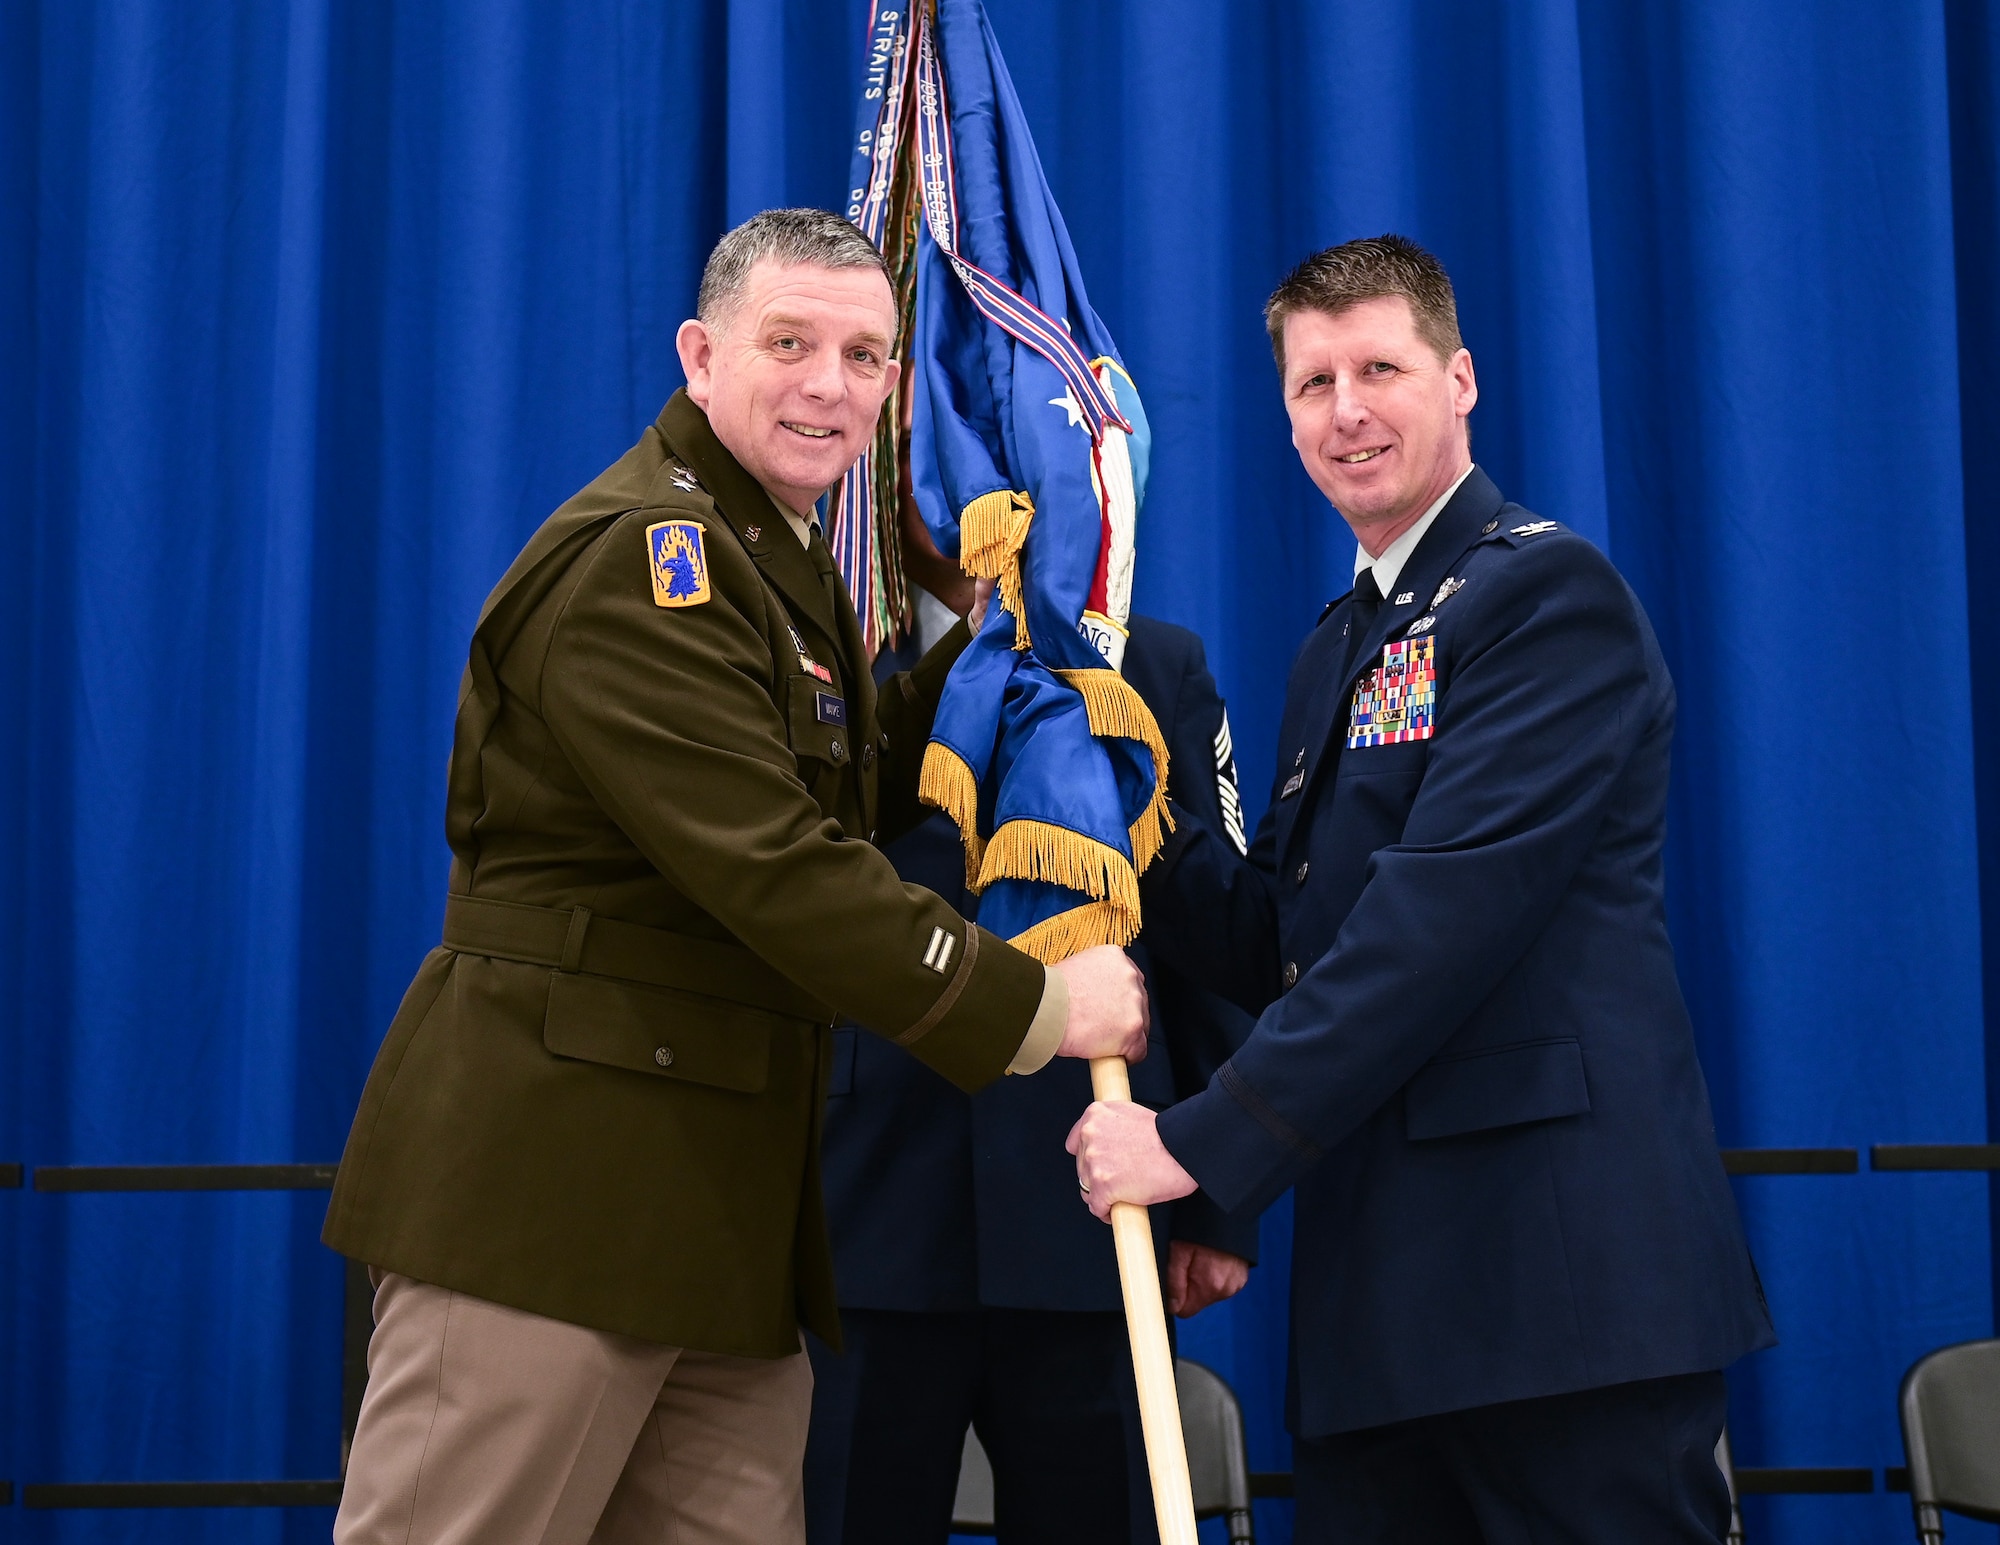 U.S. Air Force Col. Jesse Carlson, right, receives command of the 133rd Airlift Wing from U.S. Army Maj. Gen. Shawn Manke, Adjutant General, Minnesota National Guard, in St. Paul, Minn., March 4, 2023.